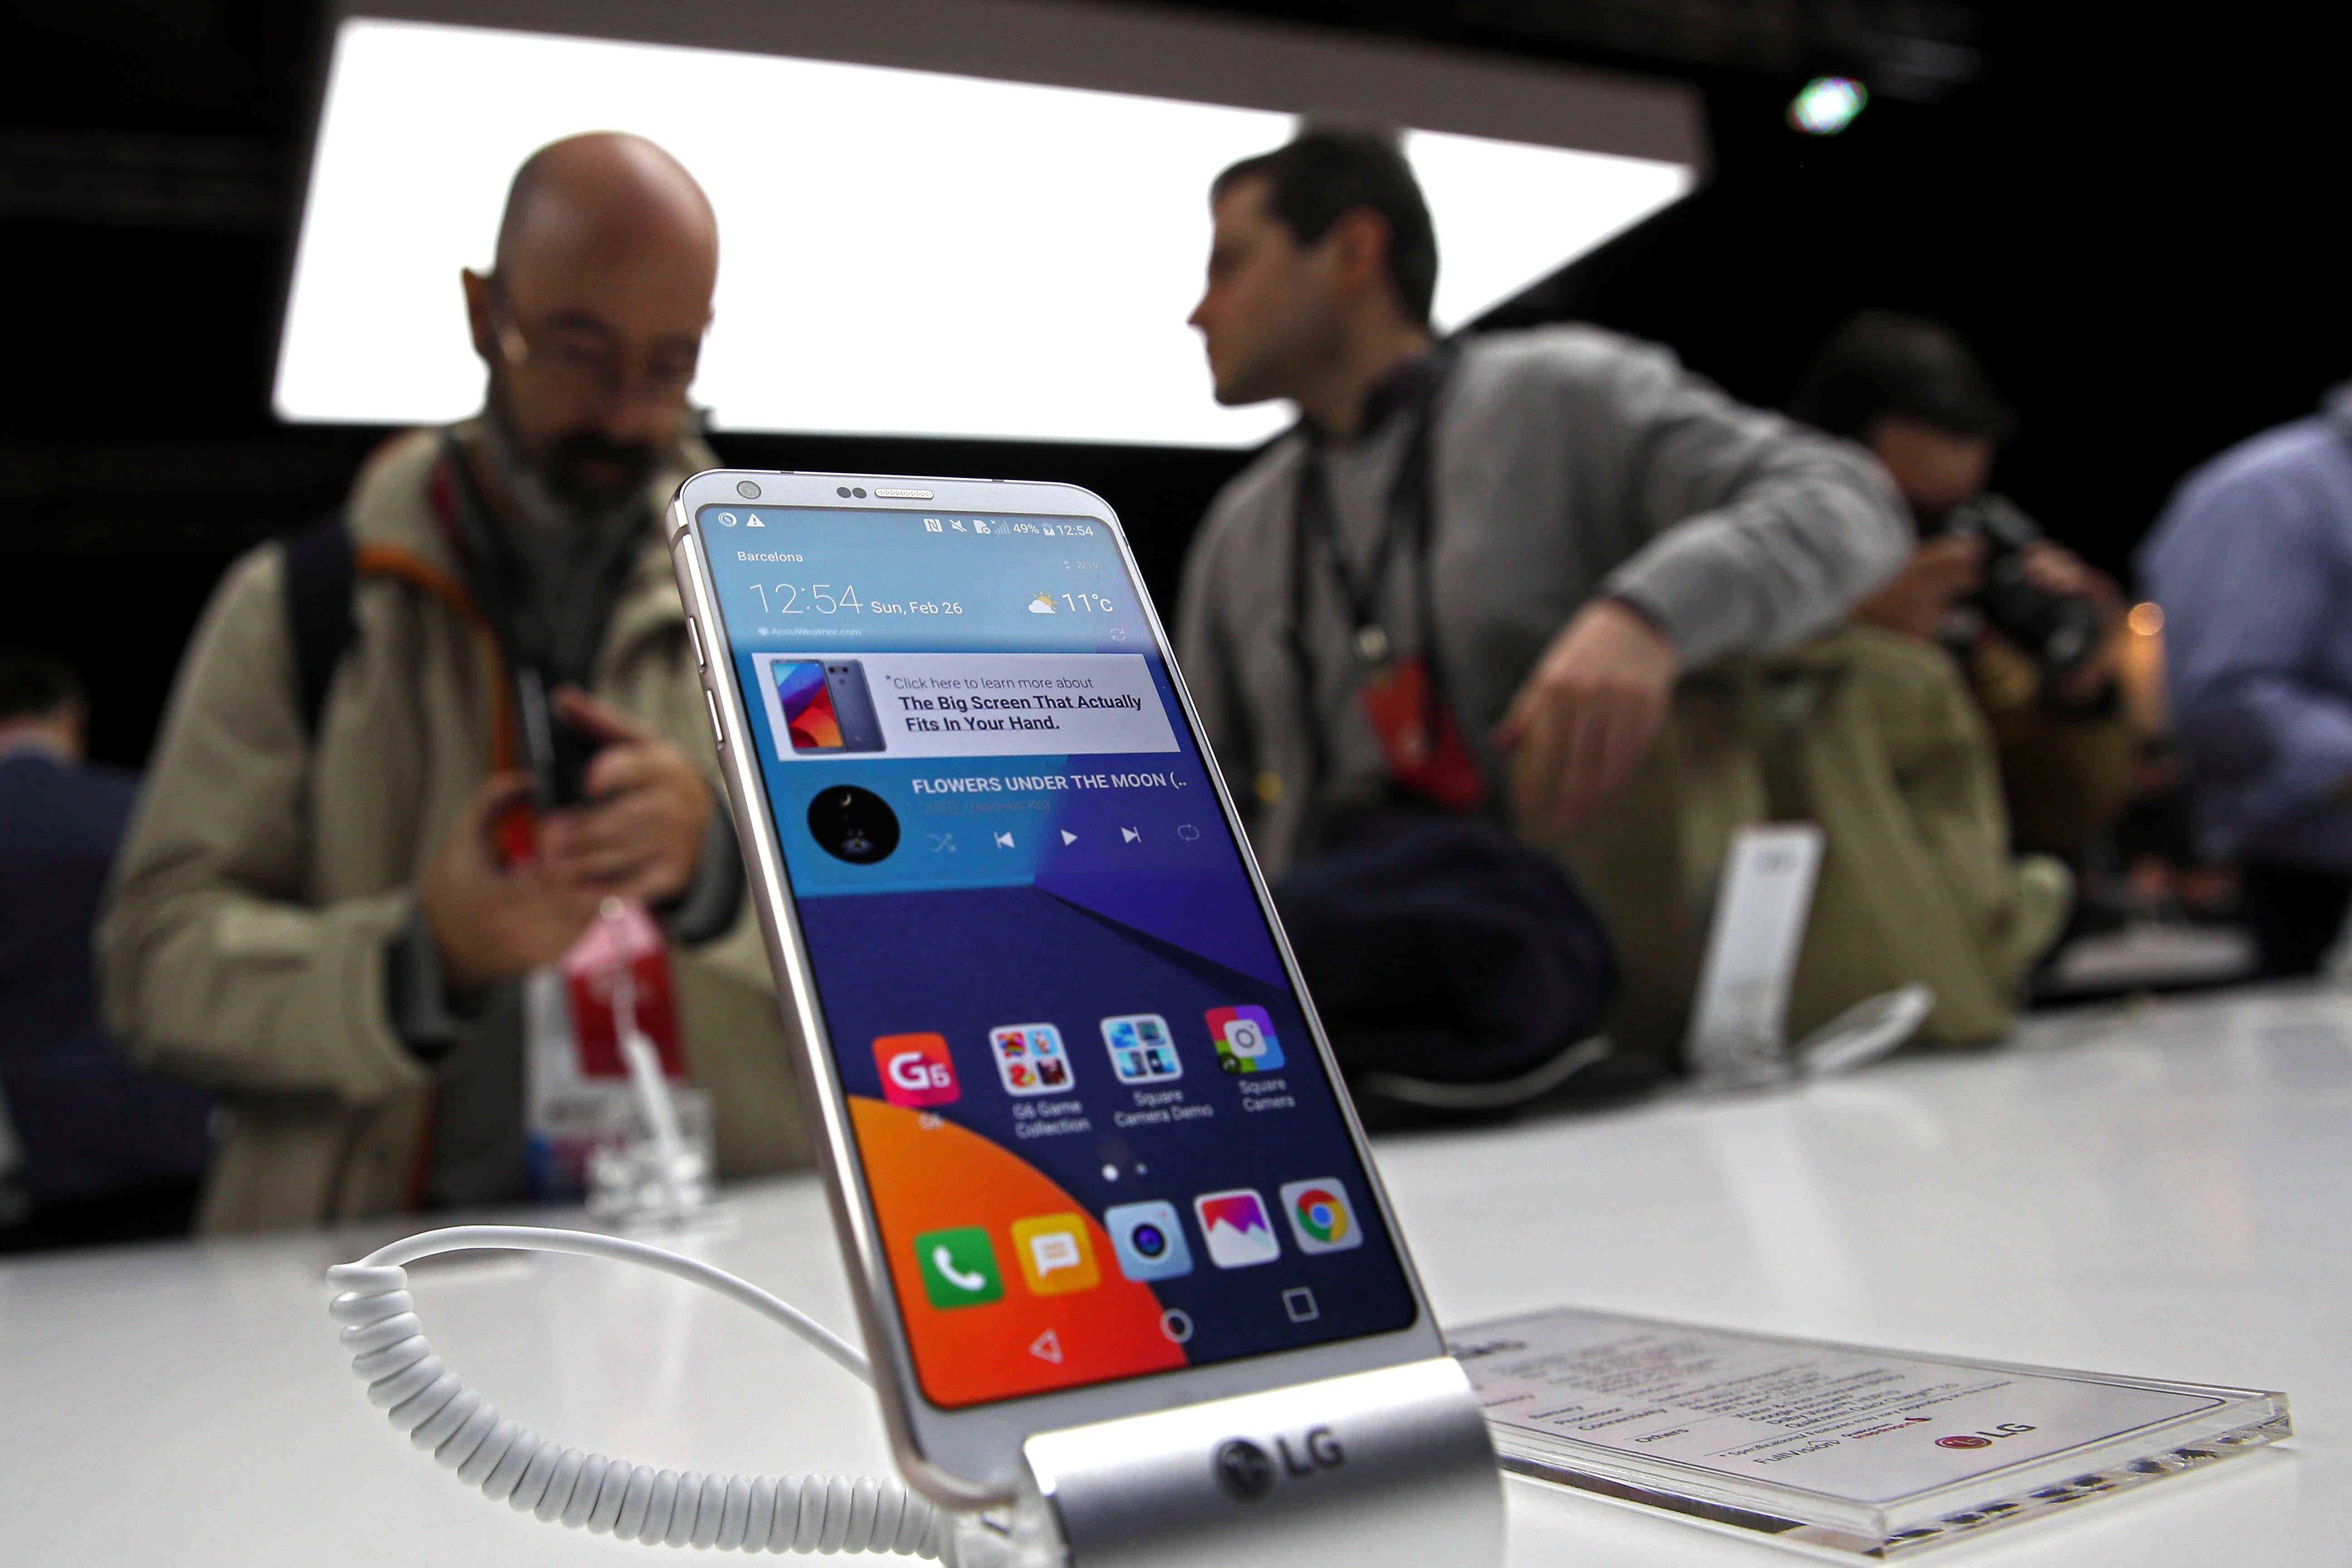 Visitors at the Mobile World Congress (MWC) in Barcelona. The congress is said to be the largest of its kind for the mobile industry and is held this year under the motto 'The Next Element.' Photo: EPA